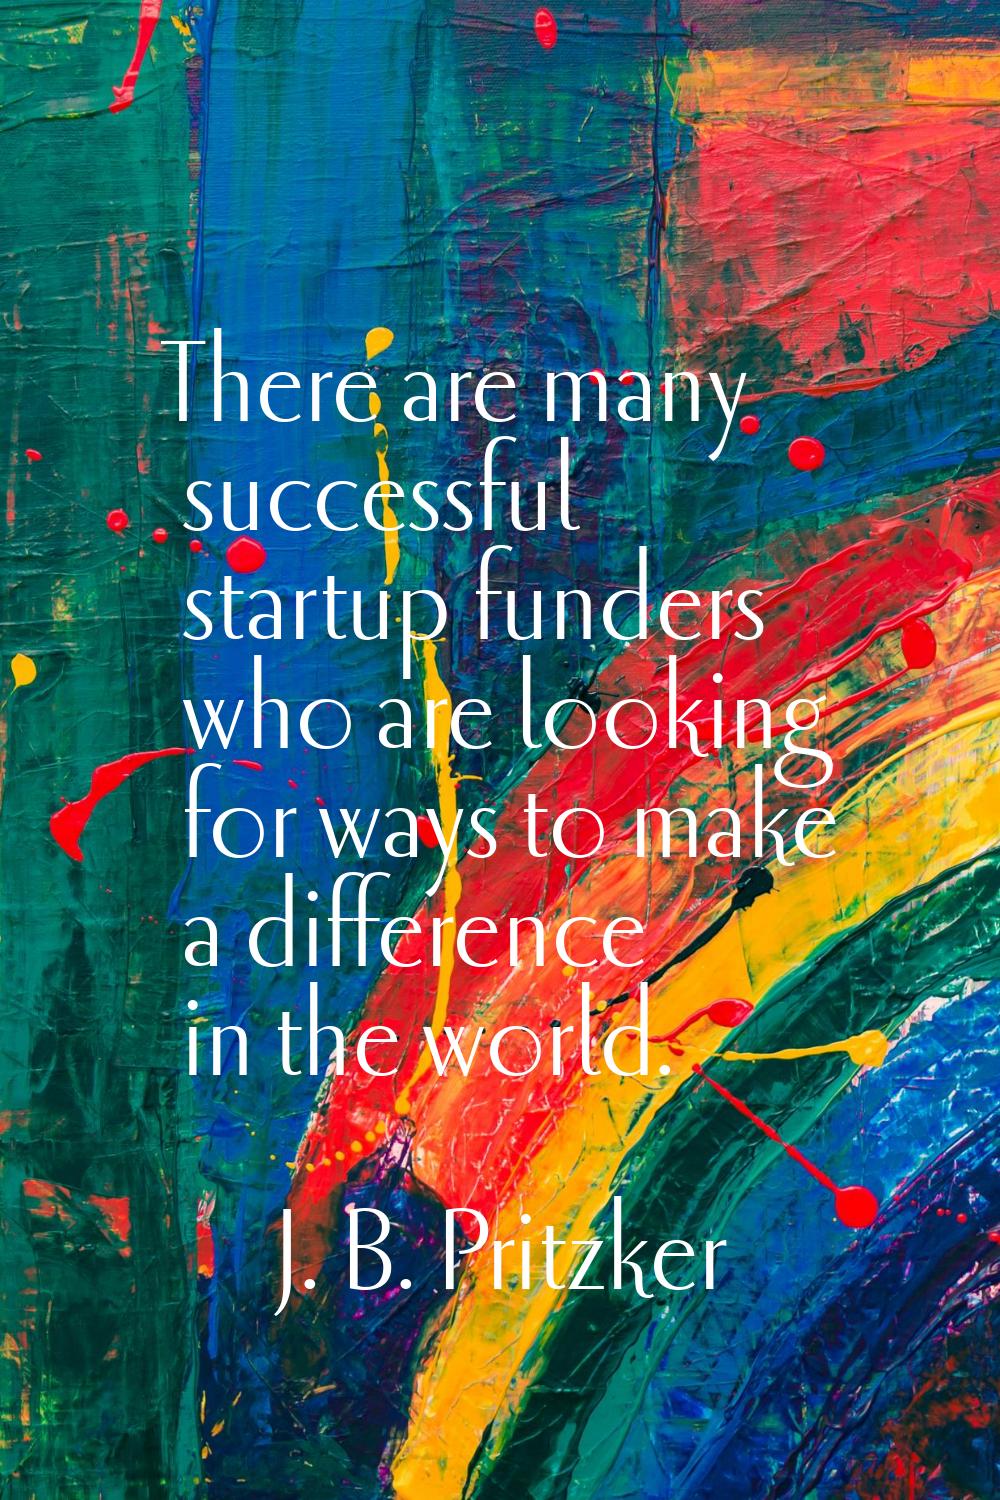 There are many successful startup funders who are looking for ways to make a difference in the worl